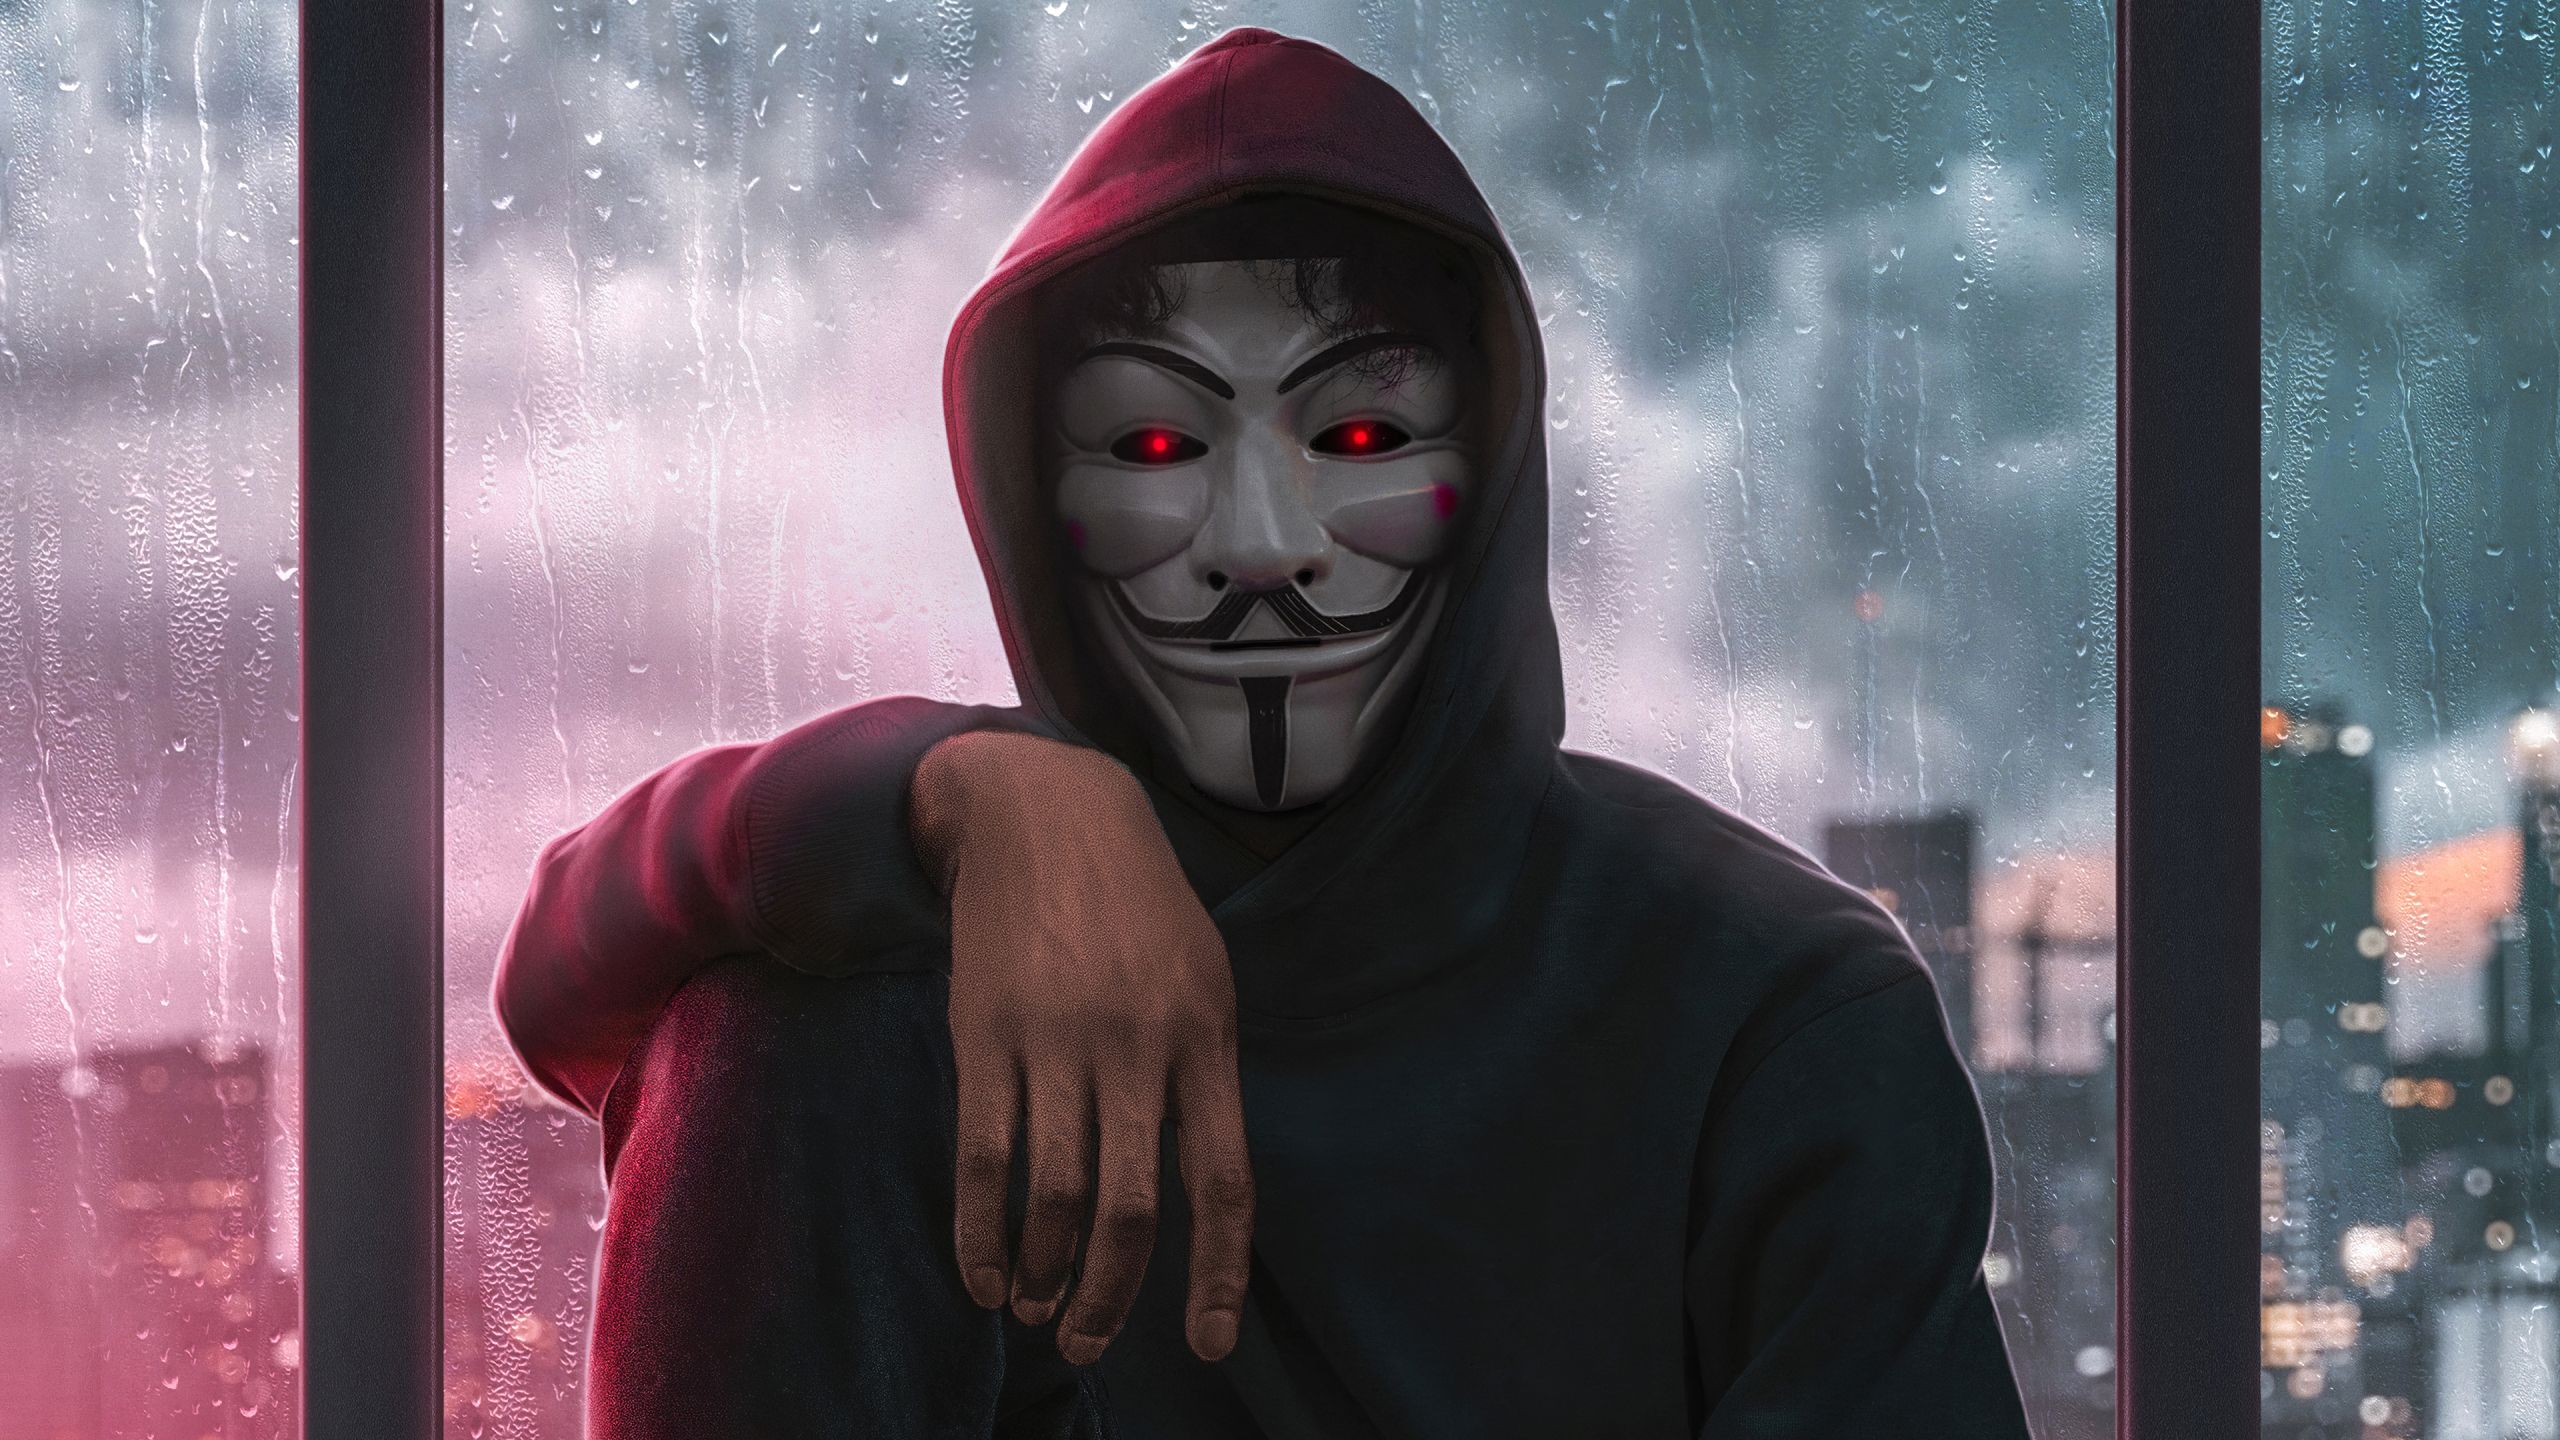 Anonymous Mask Man 1440P Resolution Wallpaper, HD Hi Tech 4K Wallpaper, Image, Photo And Background